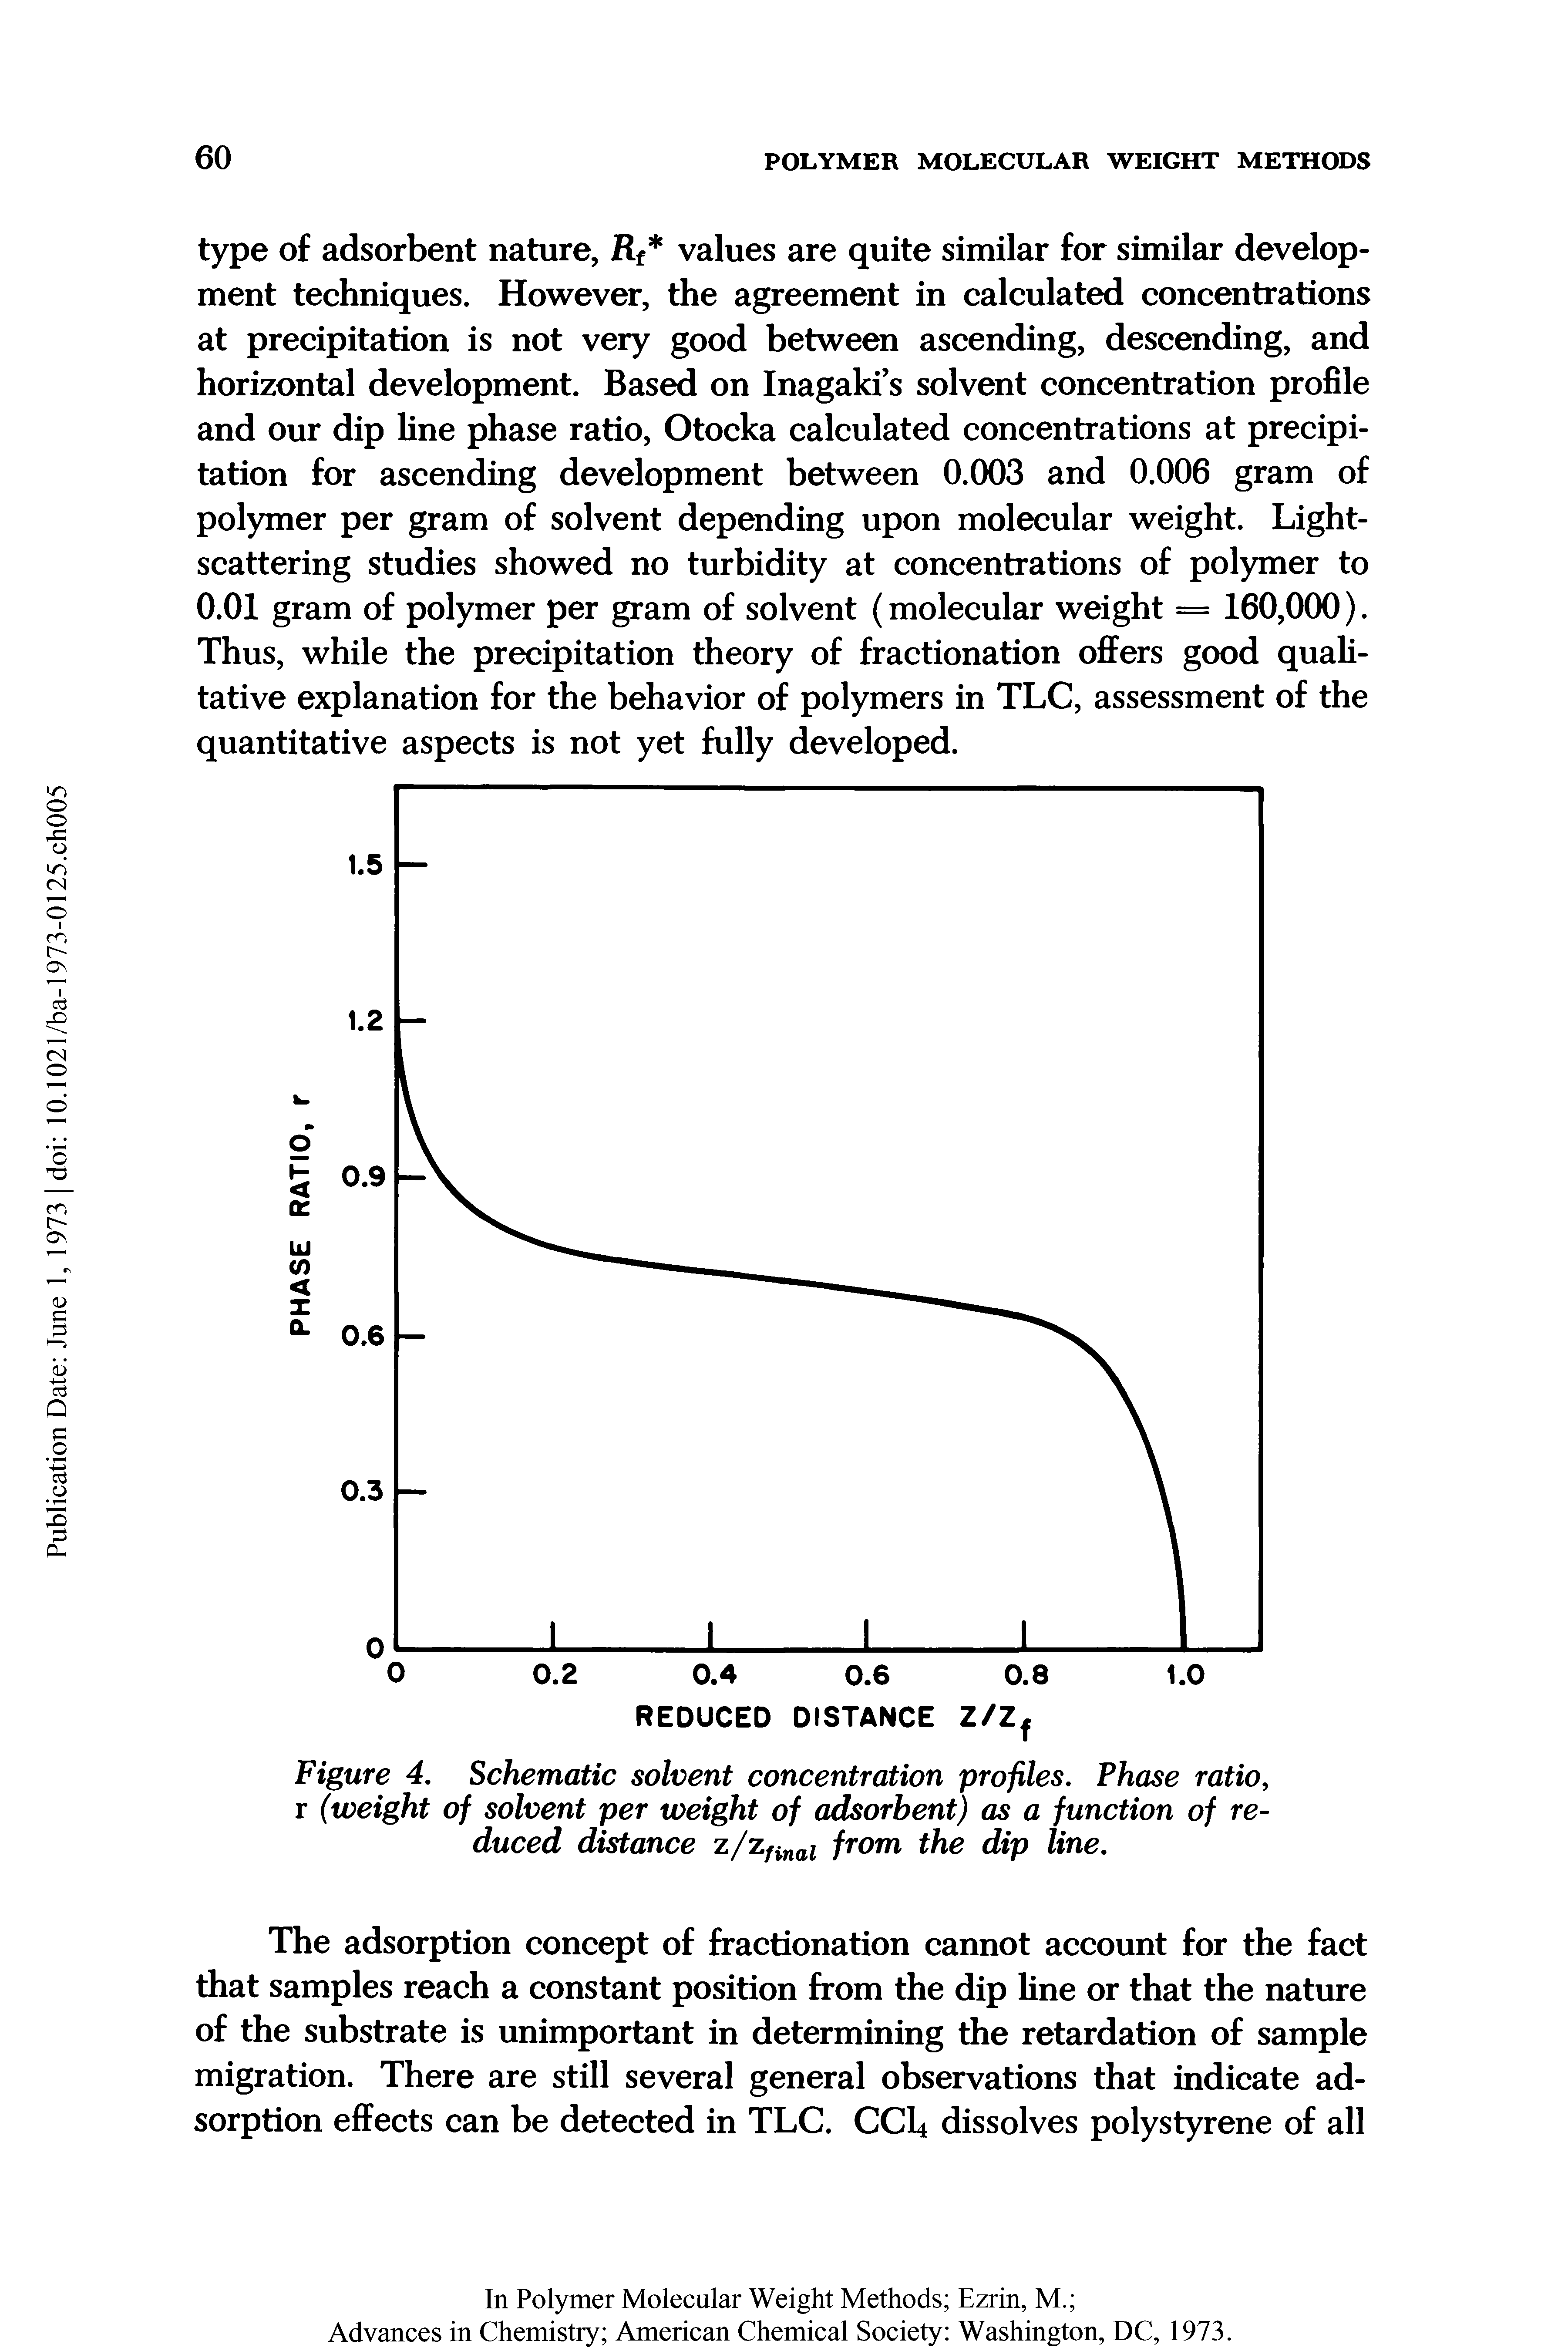 Figure 4. Schematic solvent concentration profiles. Phase ratio, r (weight of solvent per weight of adsorbent) as a function of reduced distance z/z/iwol from the dip line.